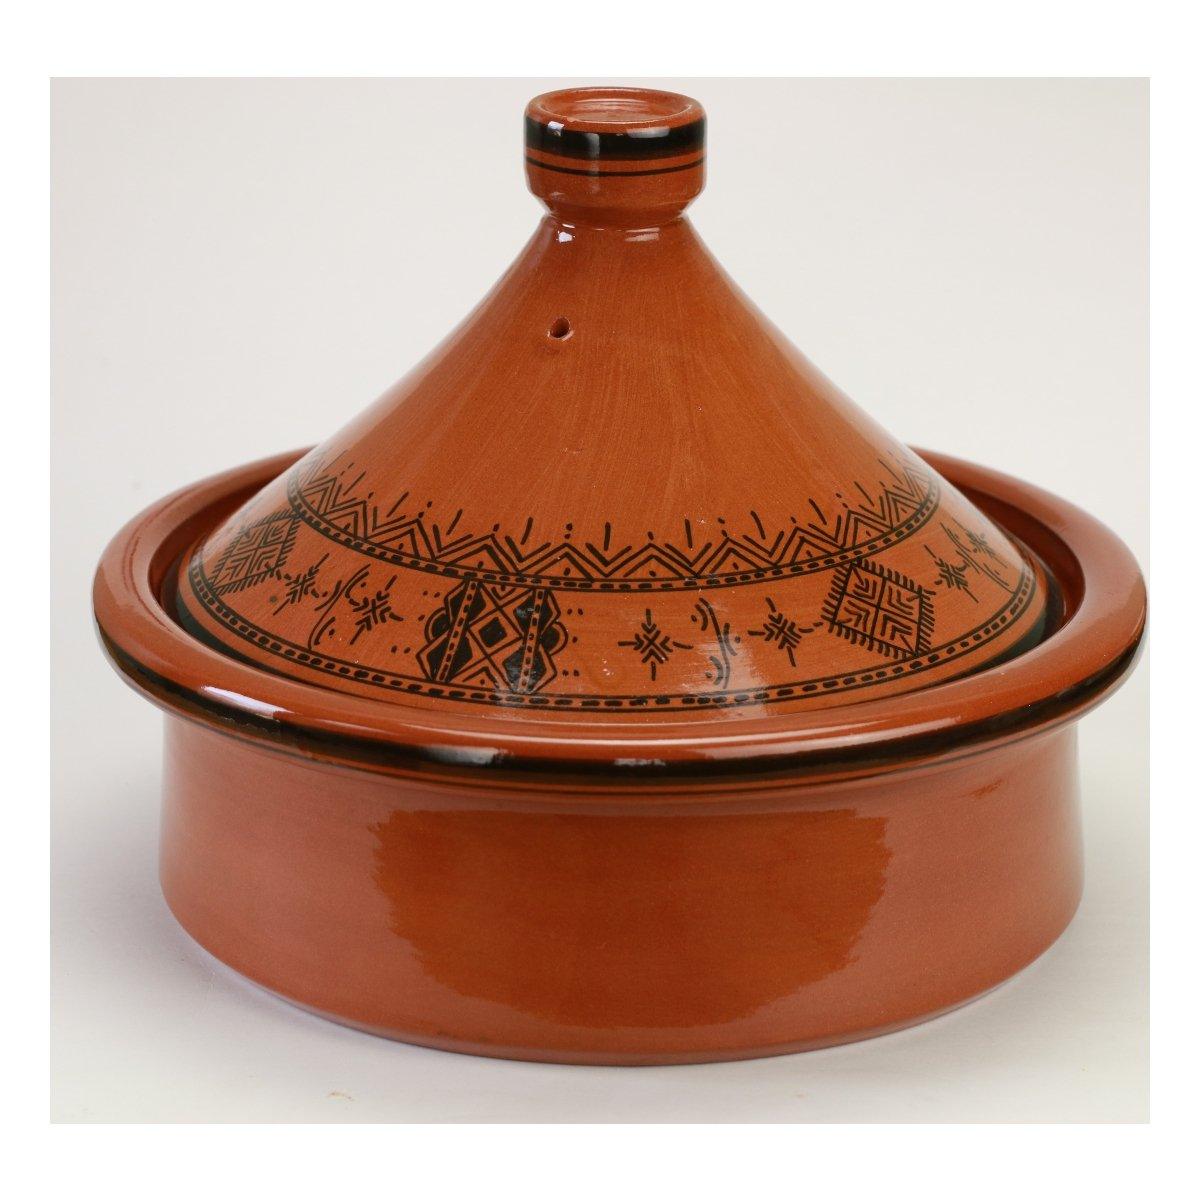 Tagines and dishes